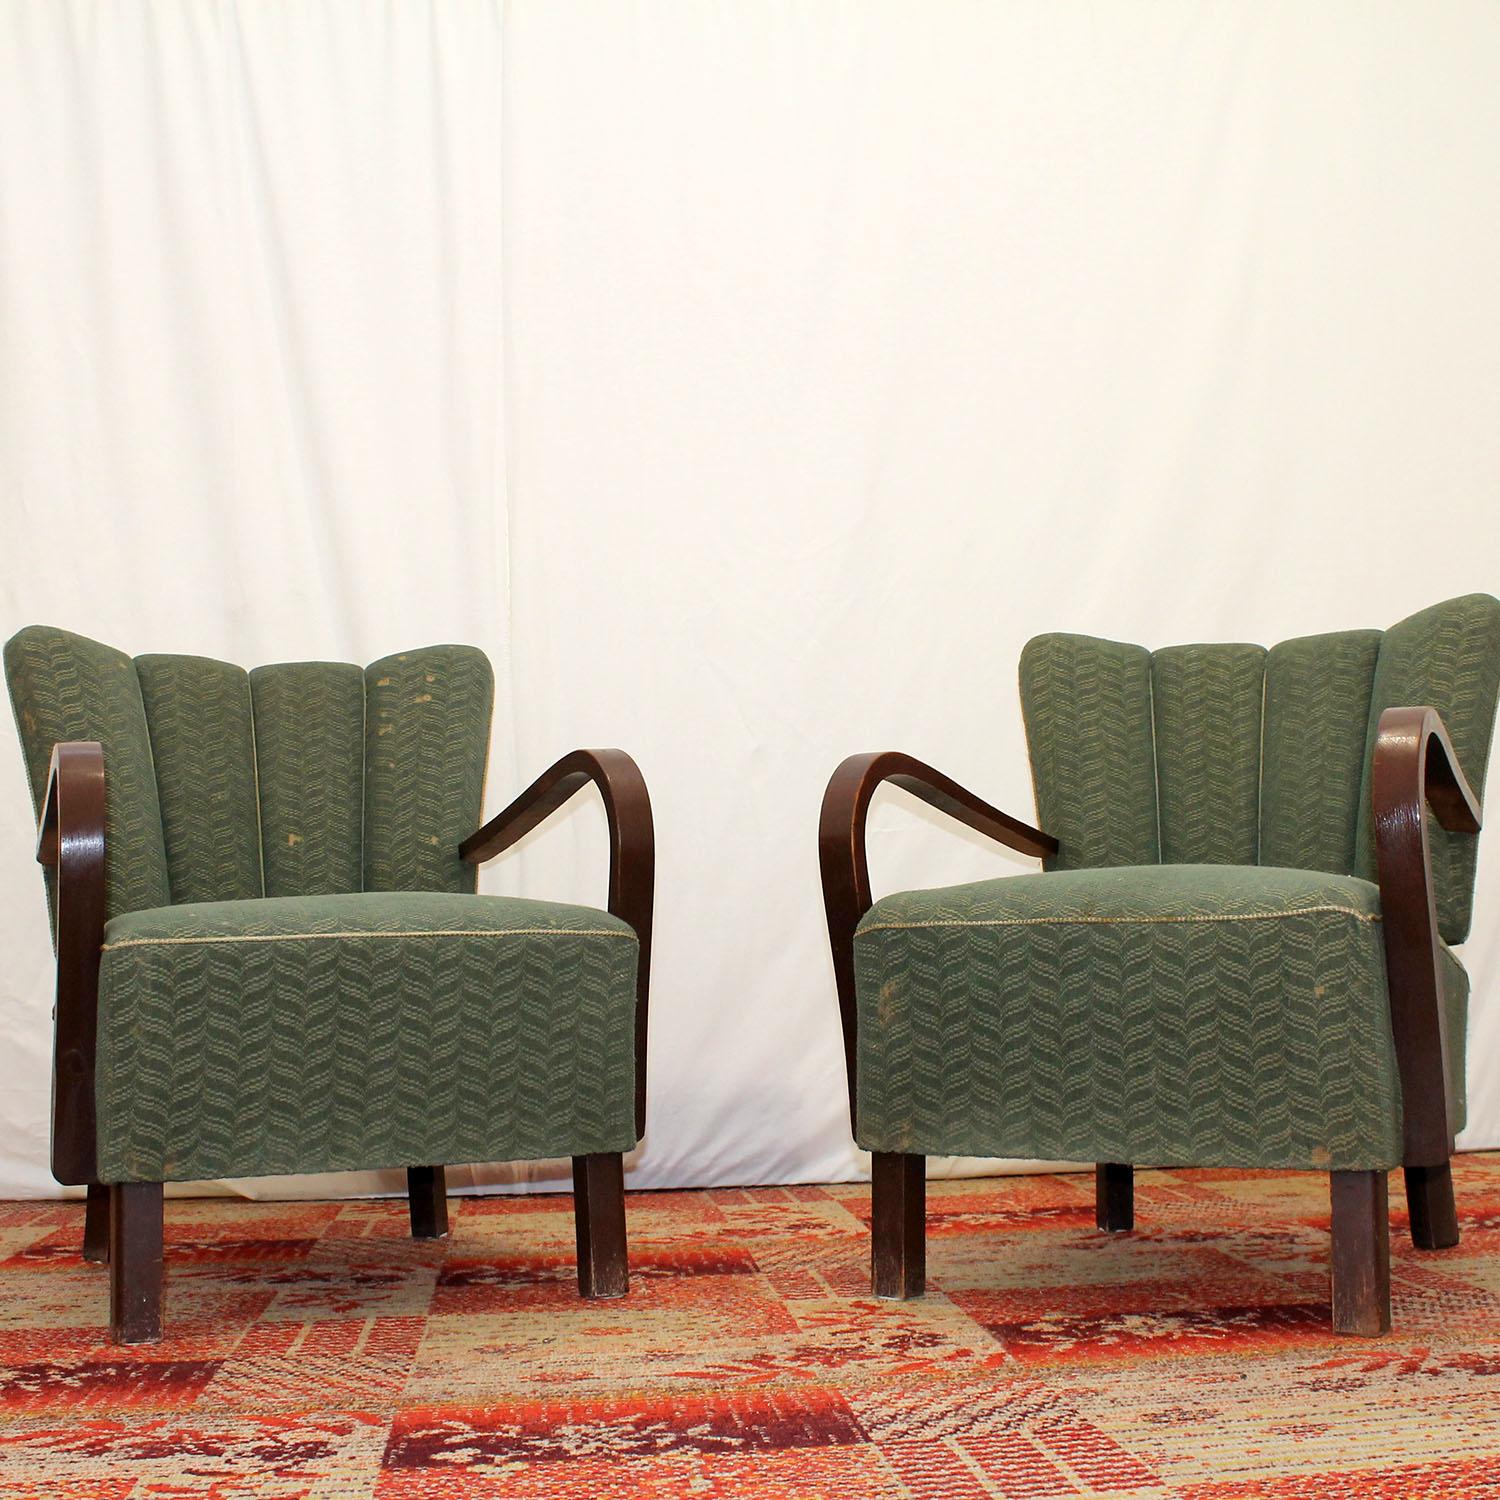 These “cocktail” armchairs Catalog No. H-237 were designed by Jindrich Halabala. Made in te former Czechoslovakia in the 1950´s. Very interestingly shaped chair. It features a dark stained beech wood structure and original upholstery. The chairs are